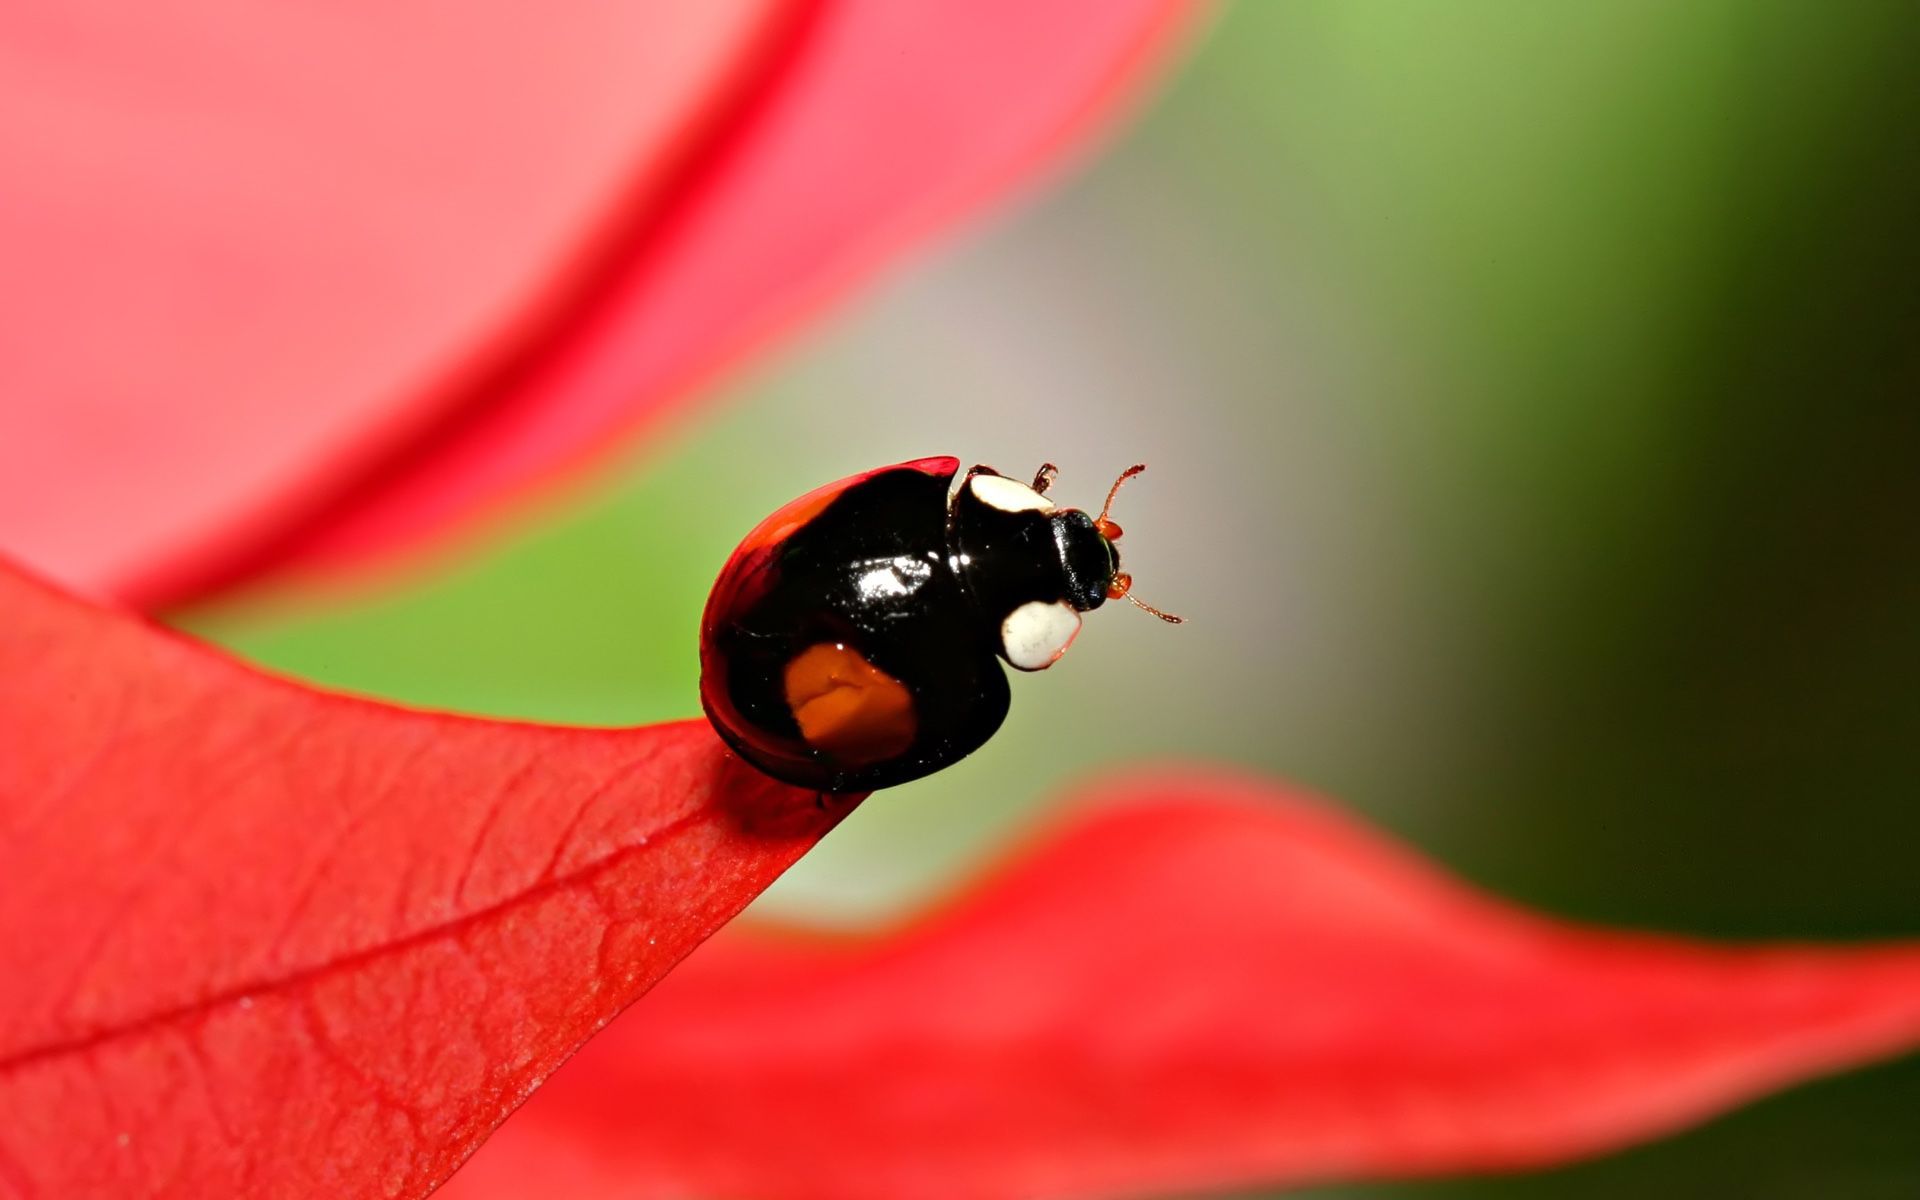 Free Wallpaper Background with Black Ladybug Picture in Macro. HD Wallpaper for Free. Ladybug, Free wallpaper background, Picture of insects